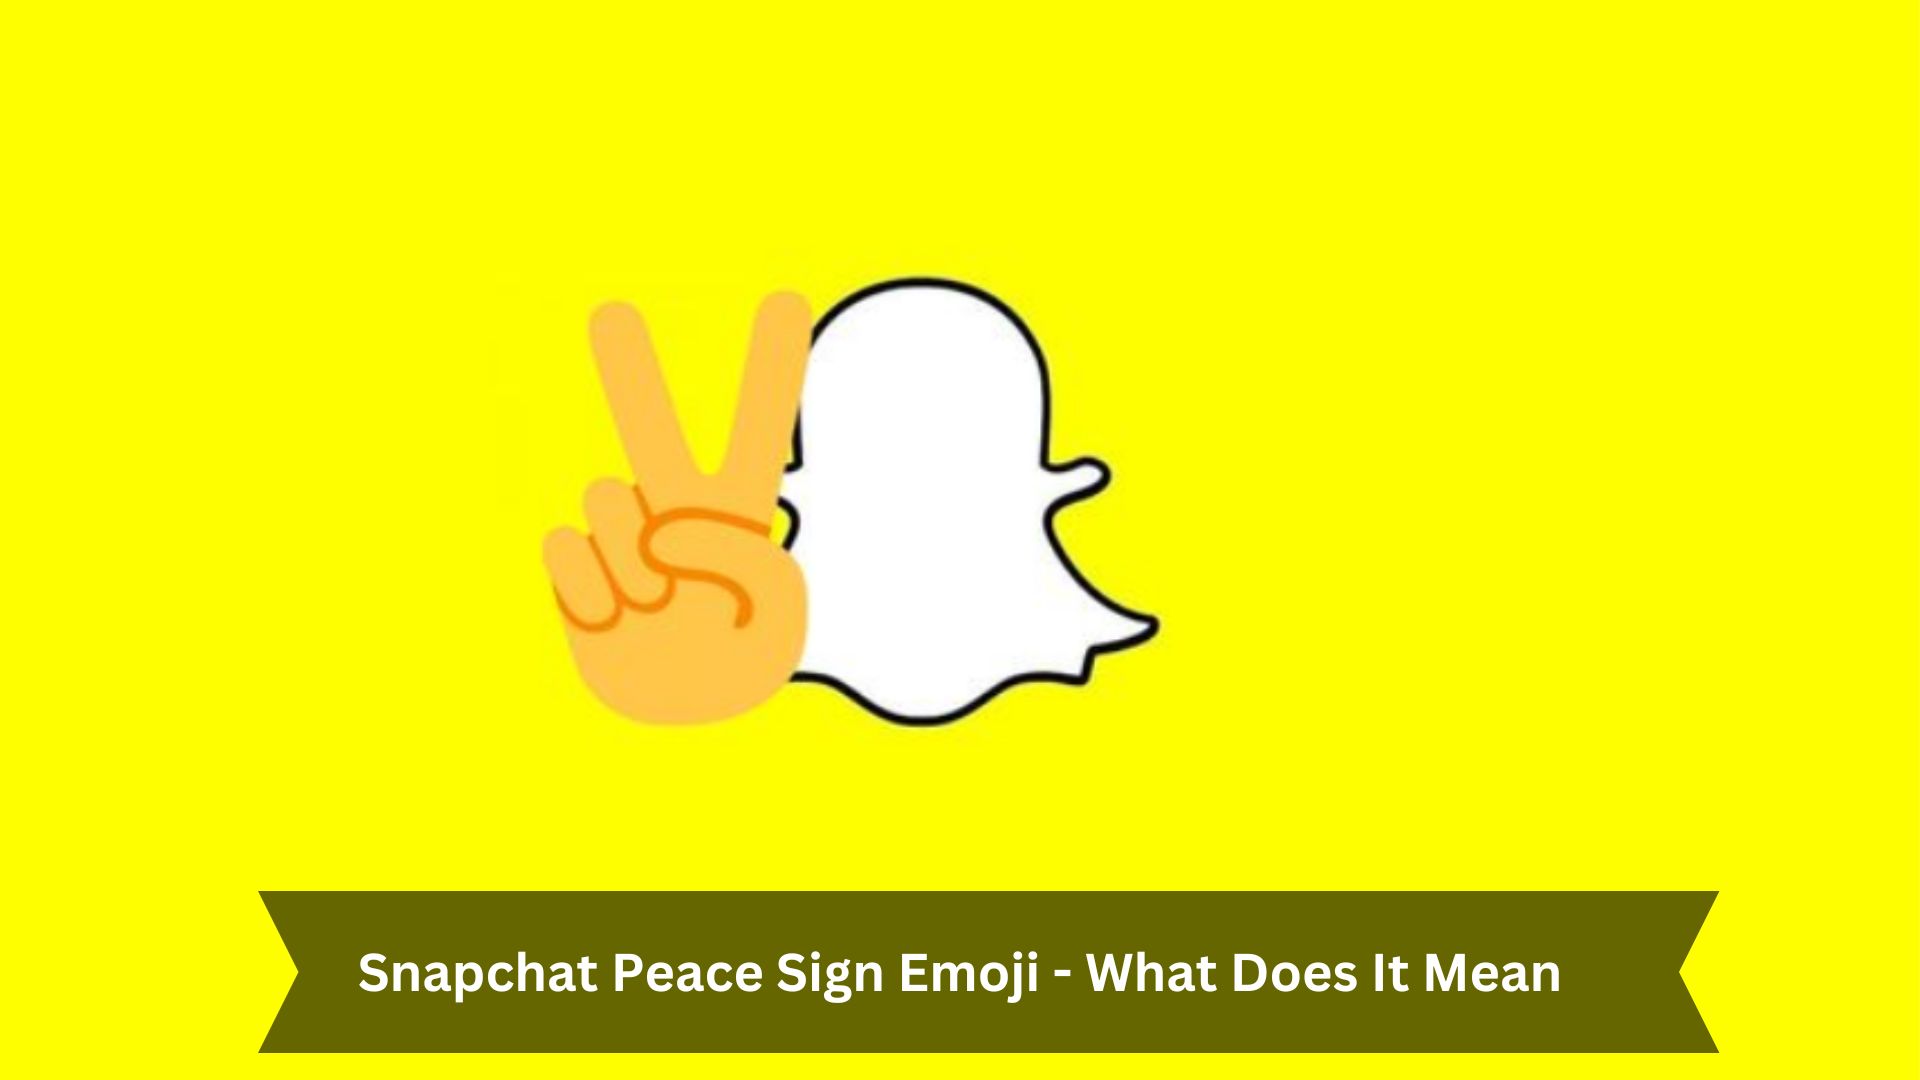 Snapchat-Peace-Sign-Emoji-What-Does-It-Mean